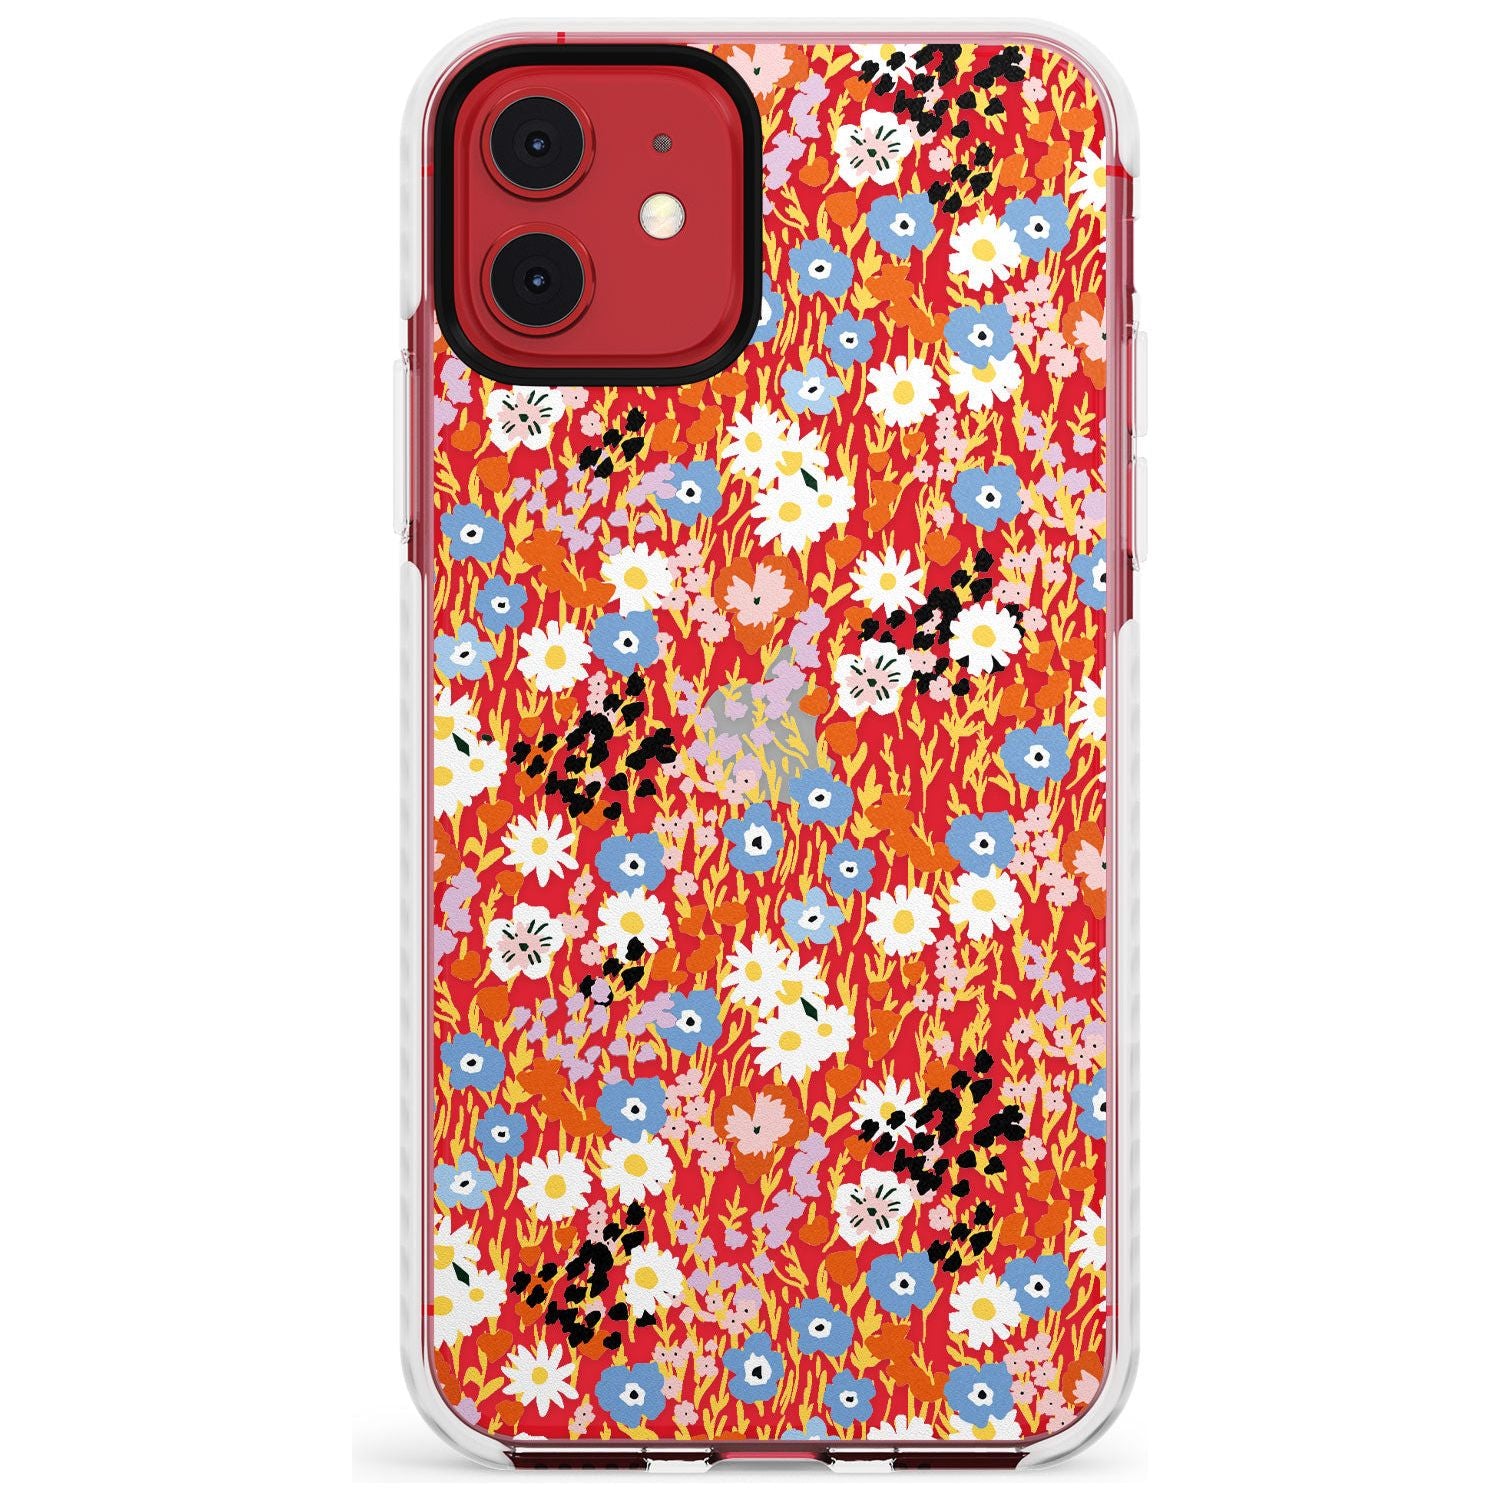 Busy Floral Mix: Transparent Slim TPU Phone Case for iPhone 11